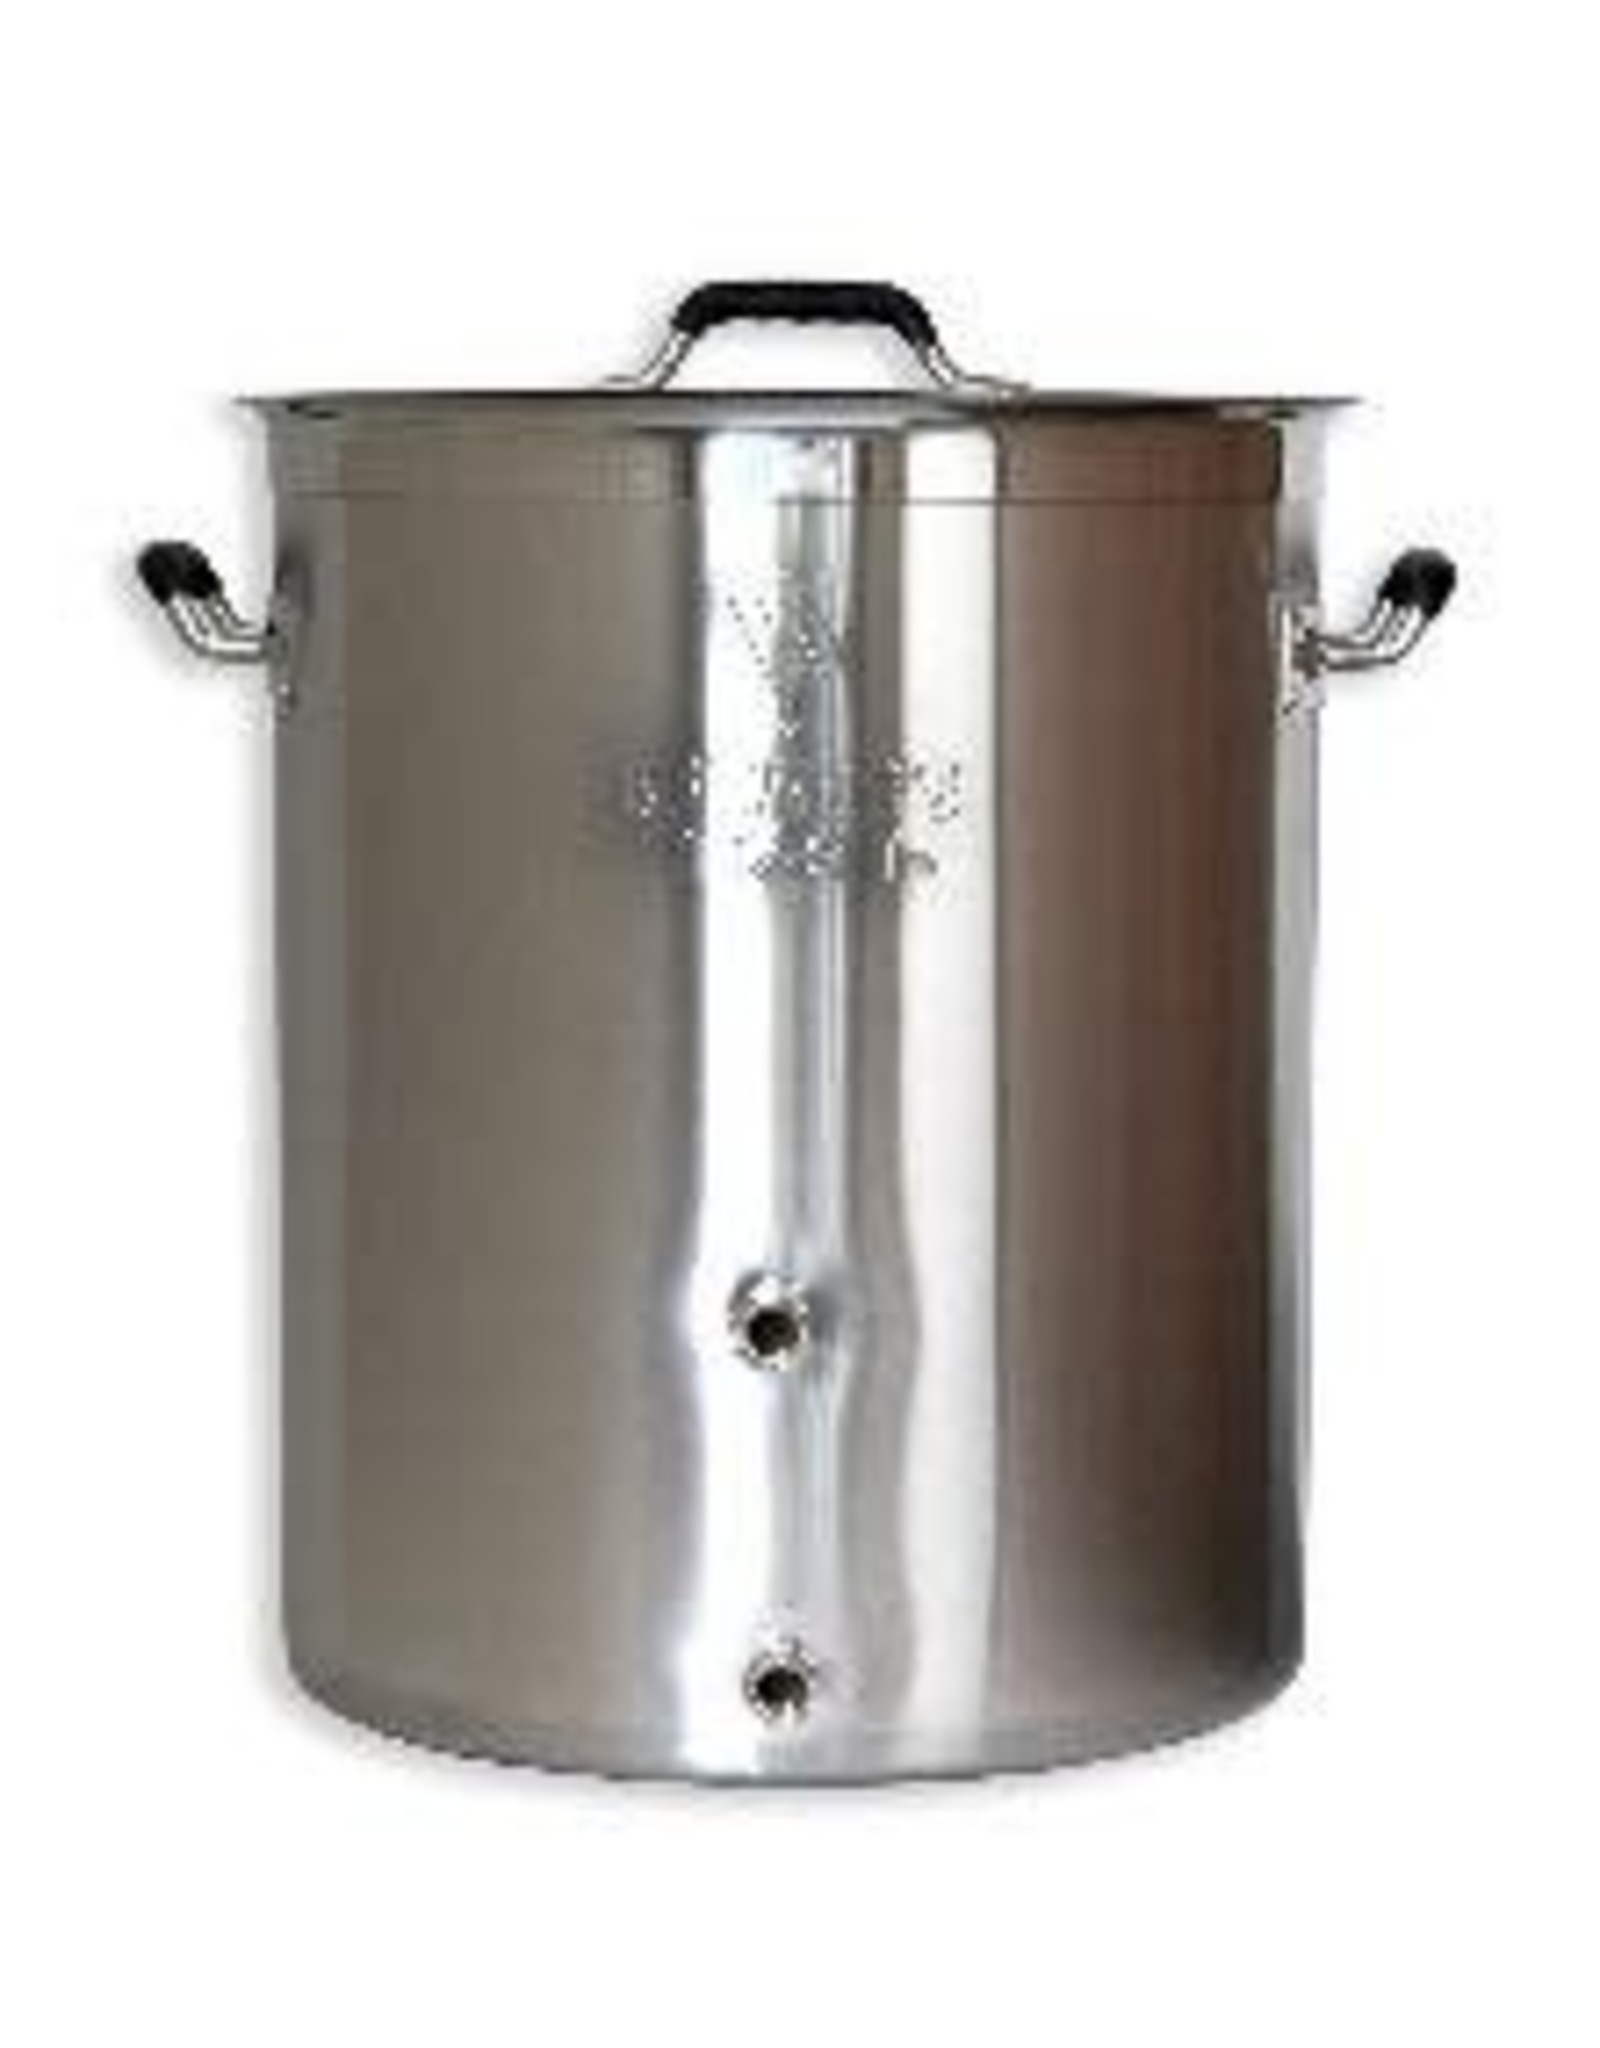 BREWERS BEST 16 GALLON BREWER'S BEAST BREWING KETTLE W/ TWO PORTS